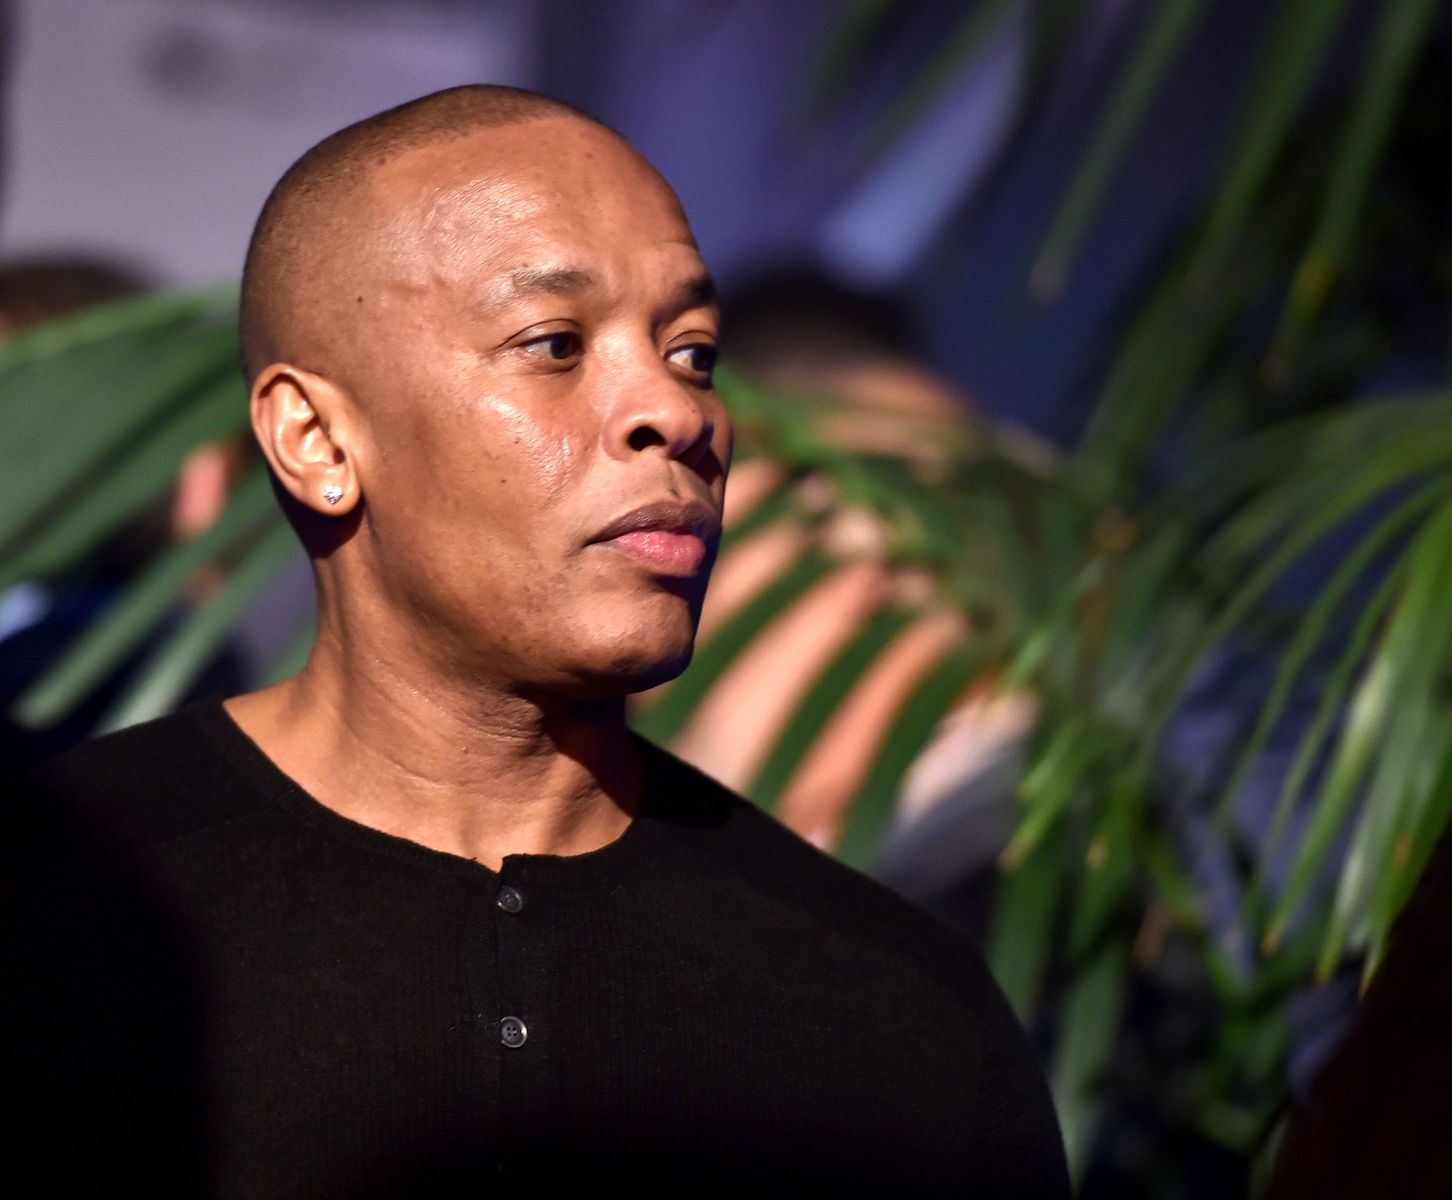 Dr. Dre attends the after-party of the "Straight Outta Compton" premiere show on August 10, 2015 in Los Angeles, California. | Photo: Getty Images